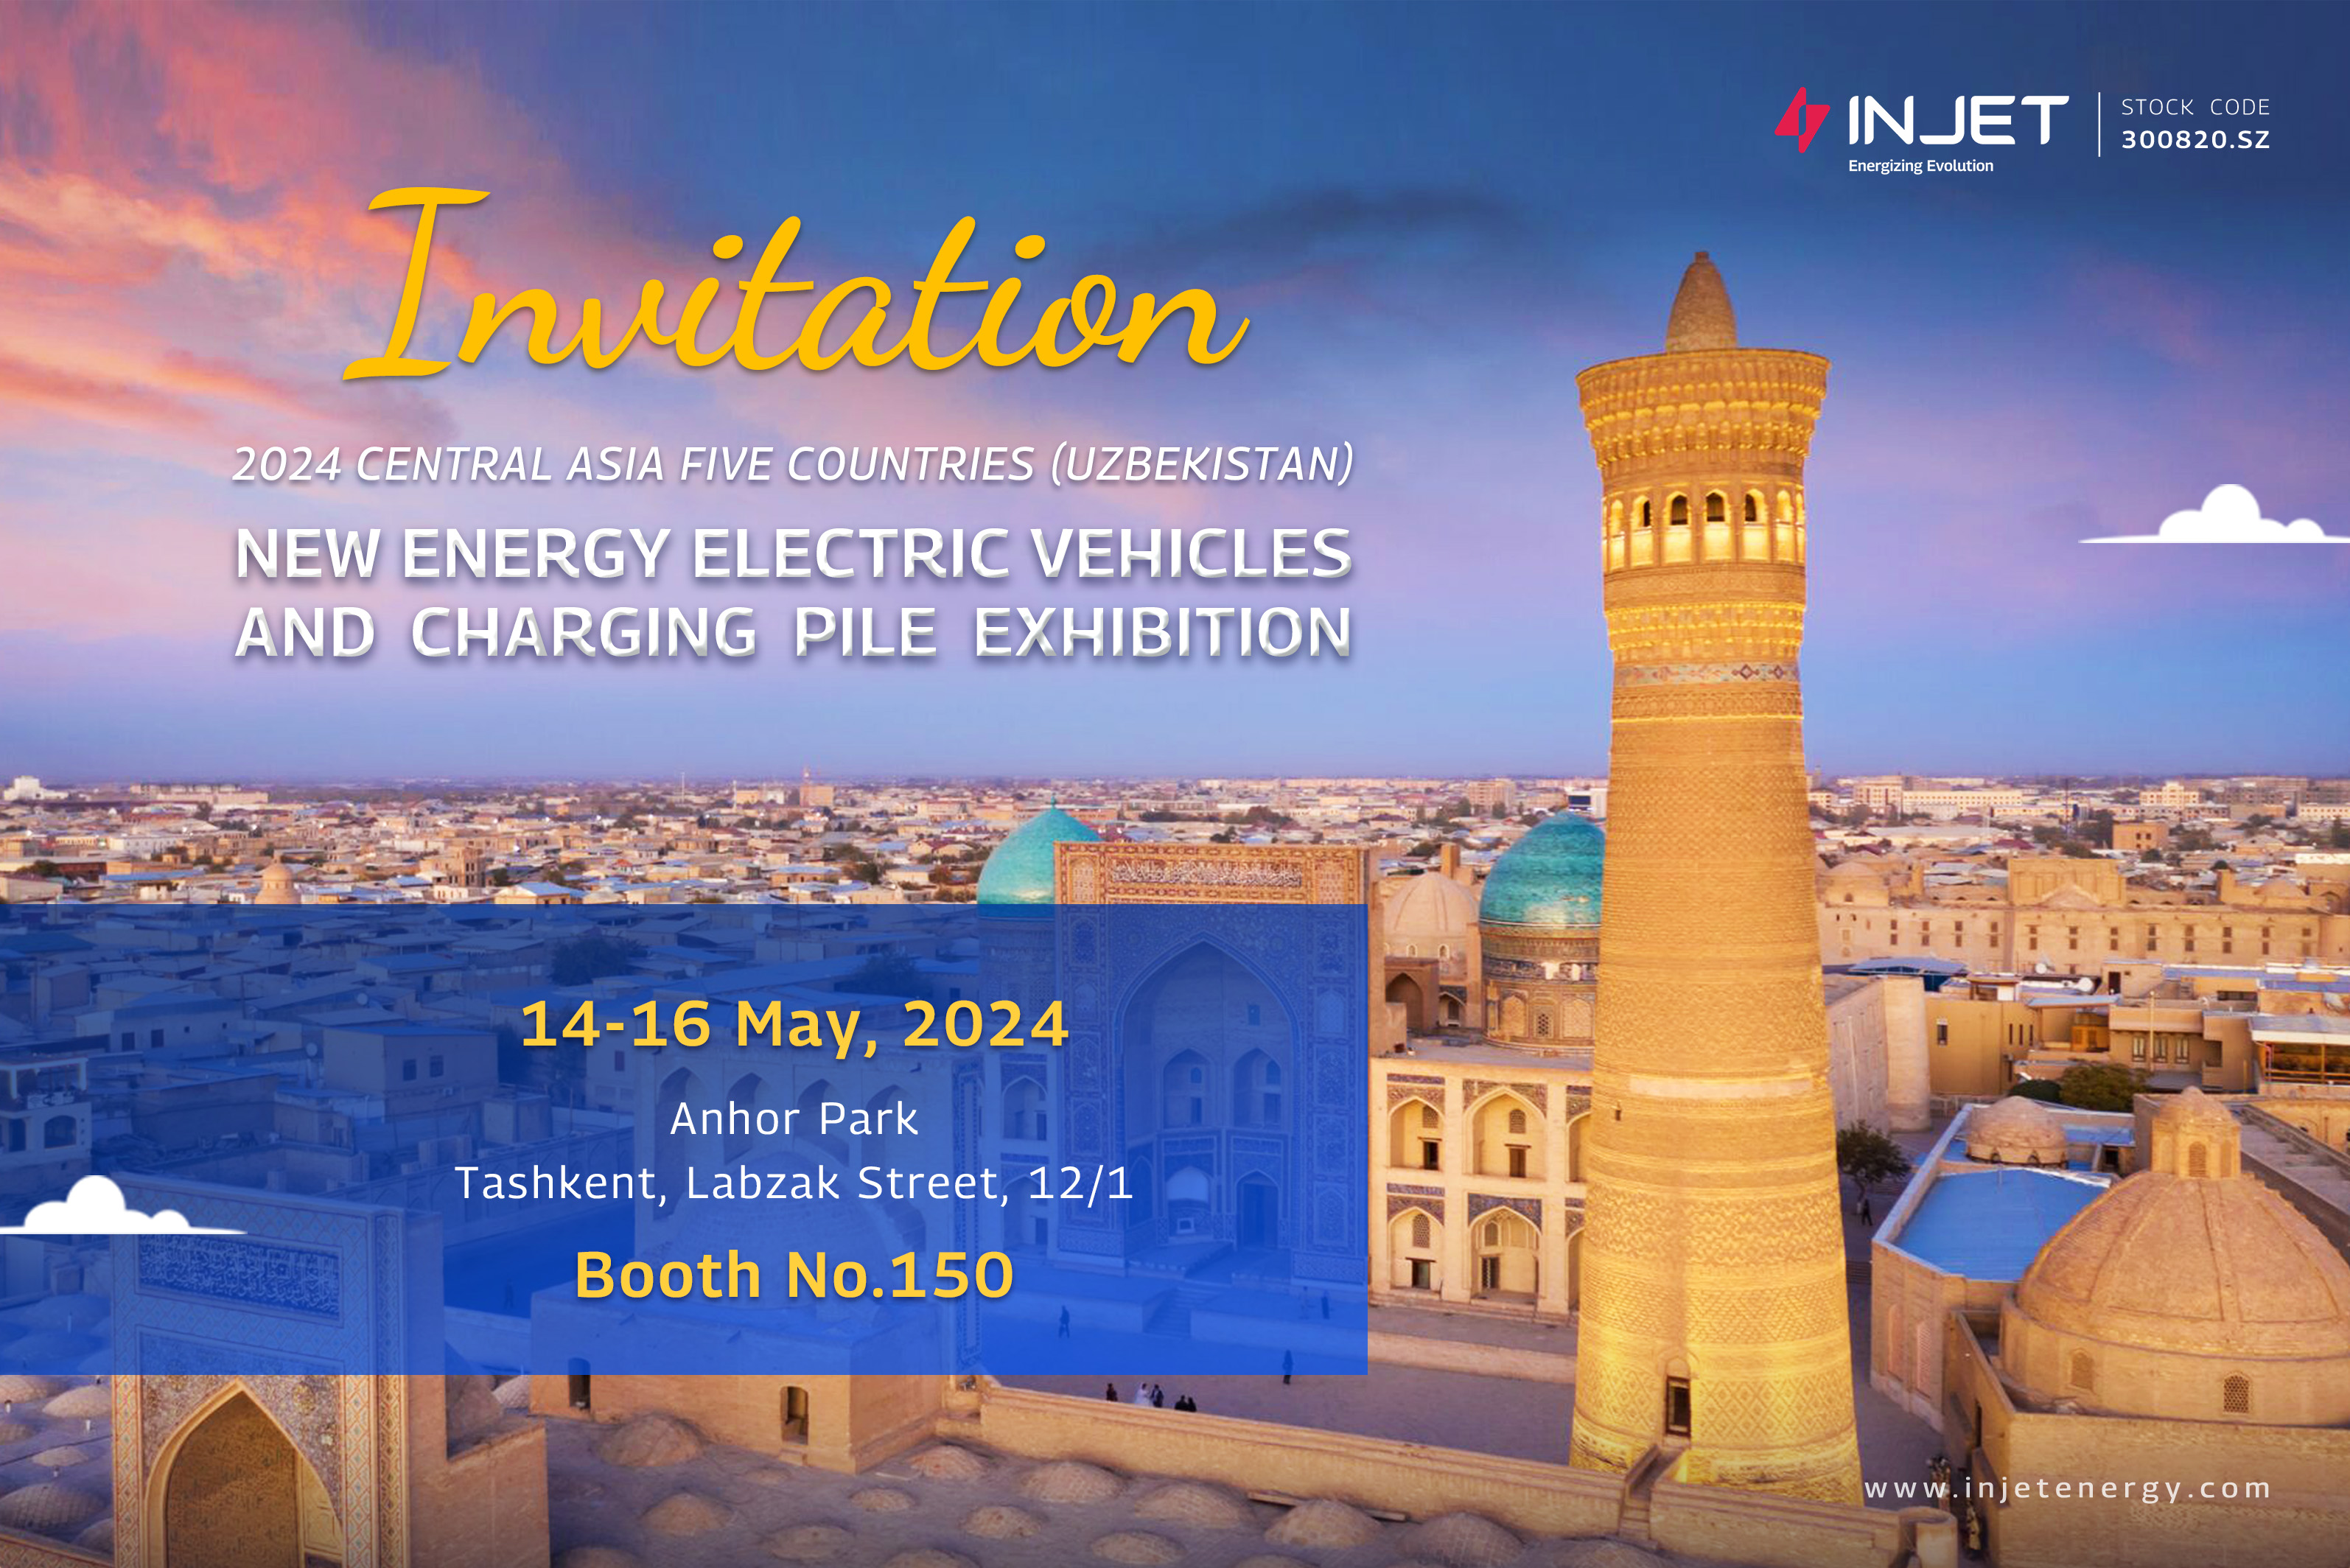 Einladung zur Central Asia New Energy Vehicle Charging Expo